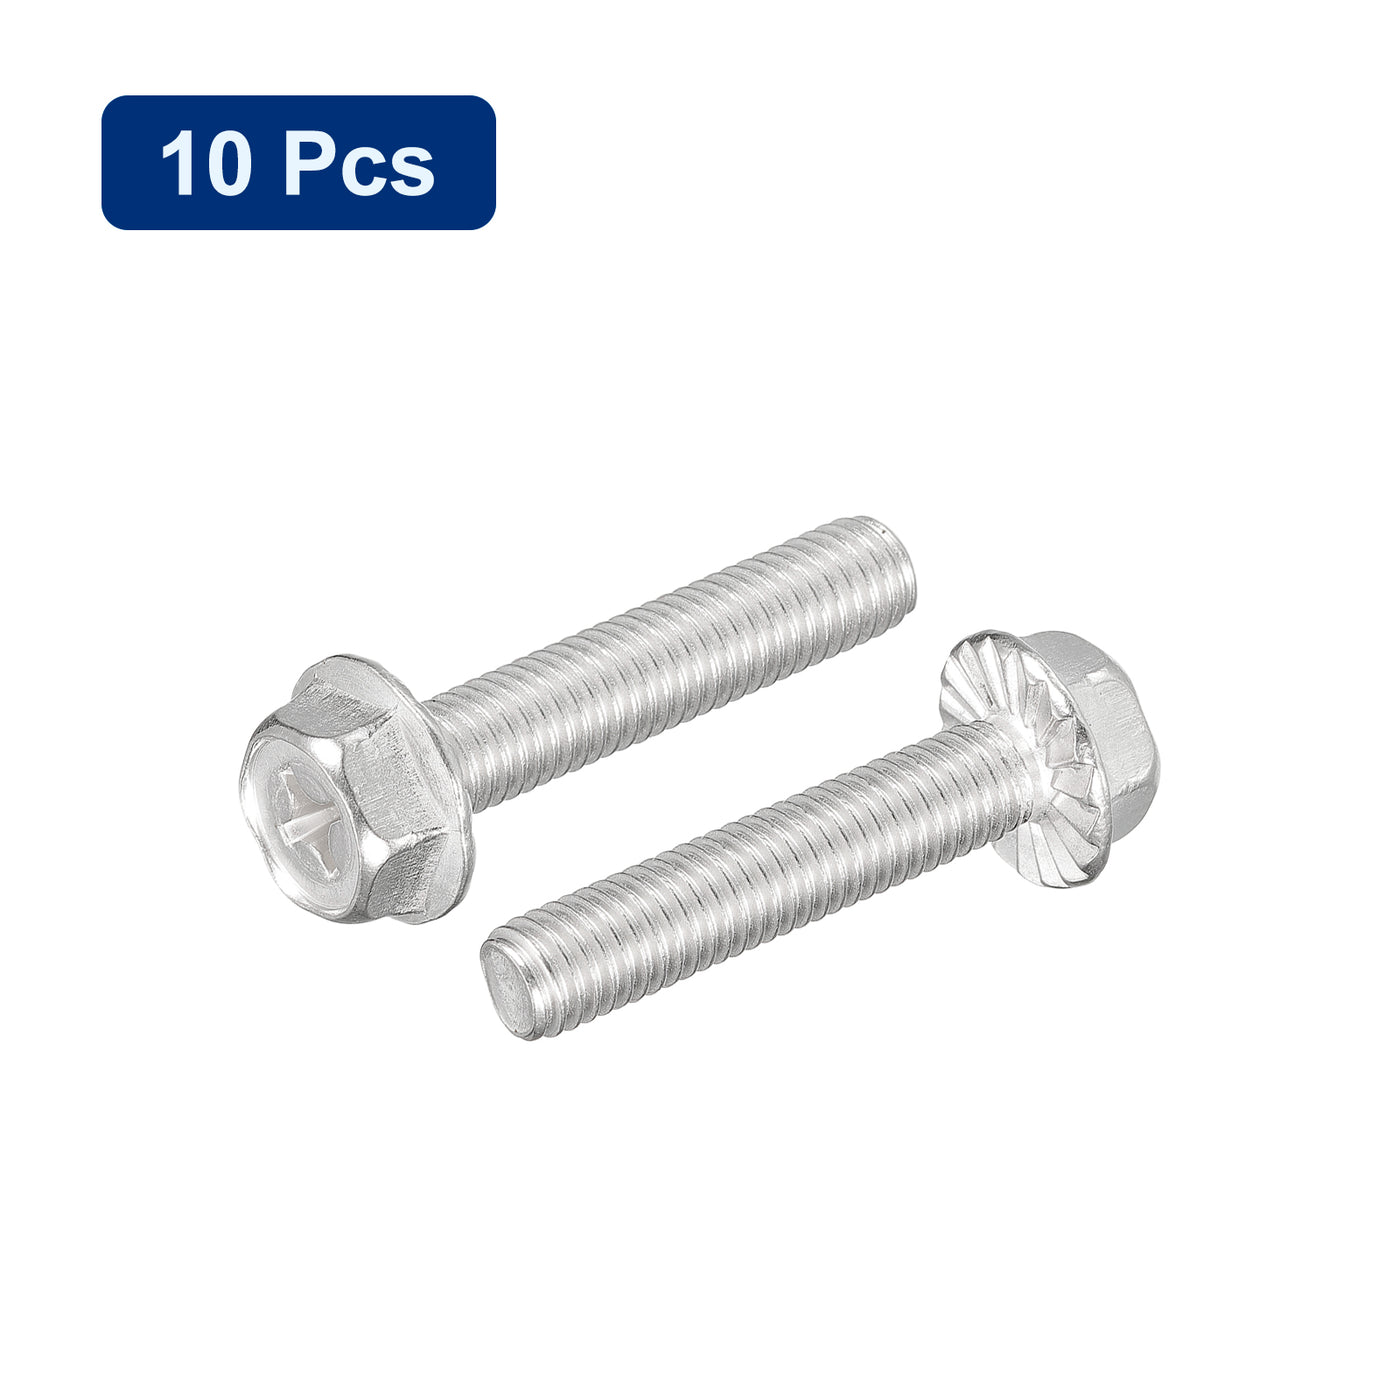 uxcell Uxcell M8x40mm Phillips Hex Head Flange Bolts, 10pcs 304 Stainless Steel Screws